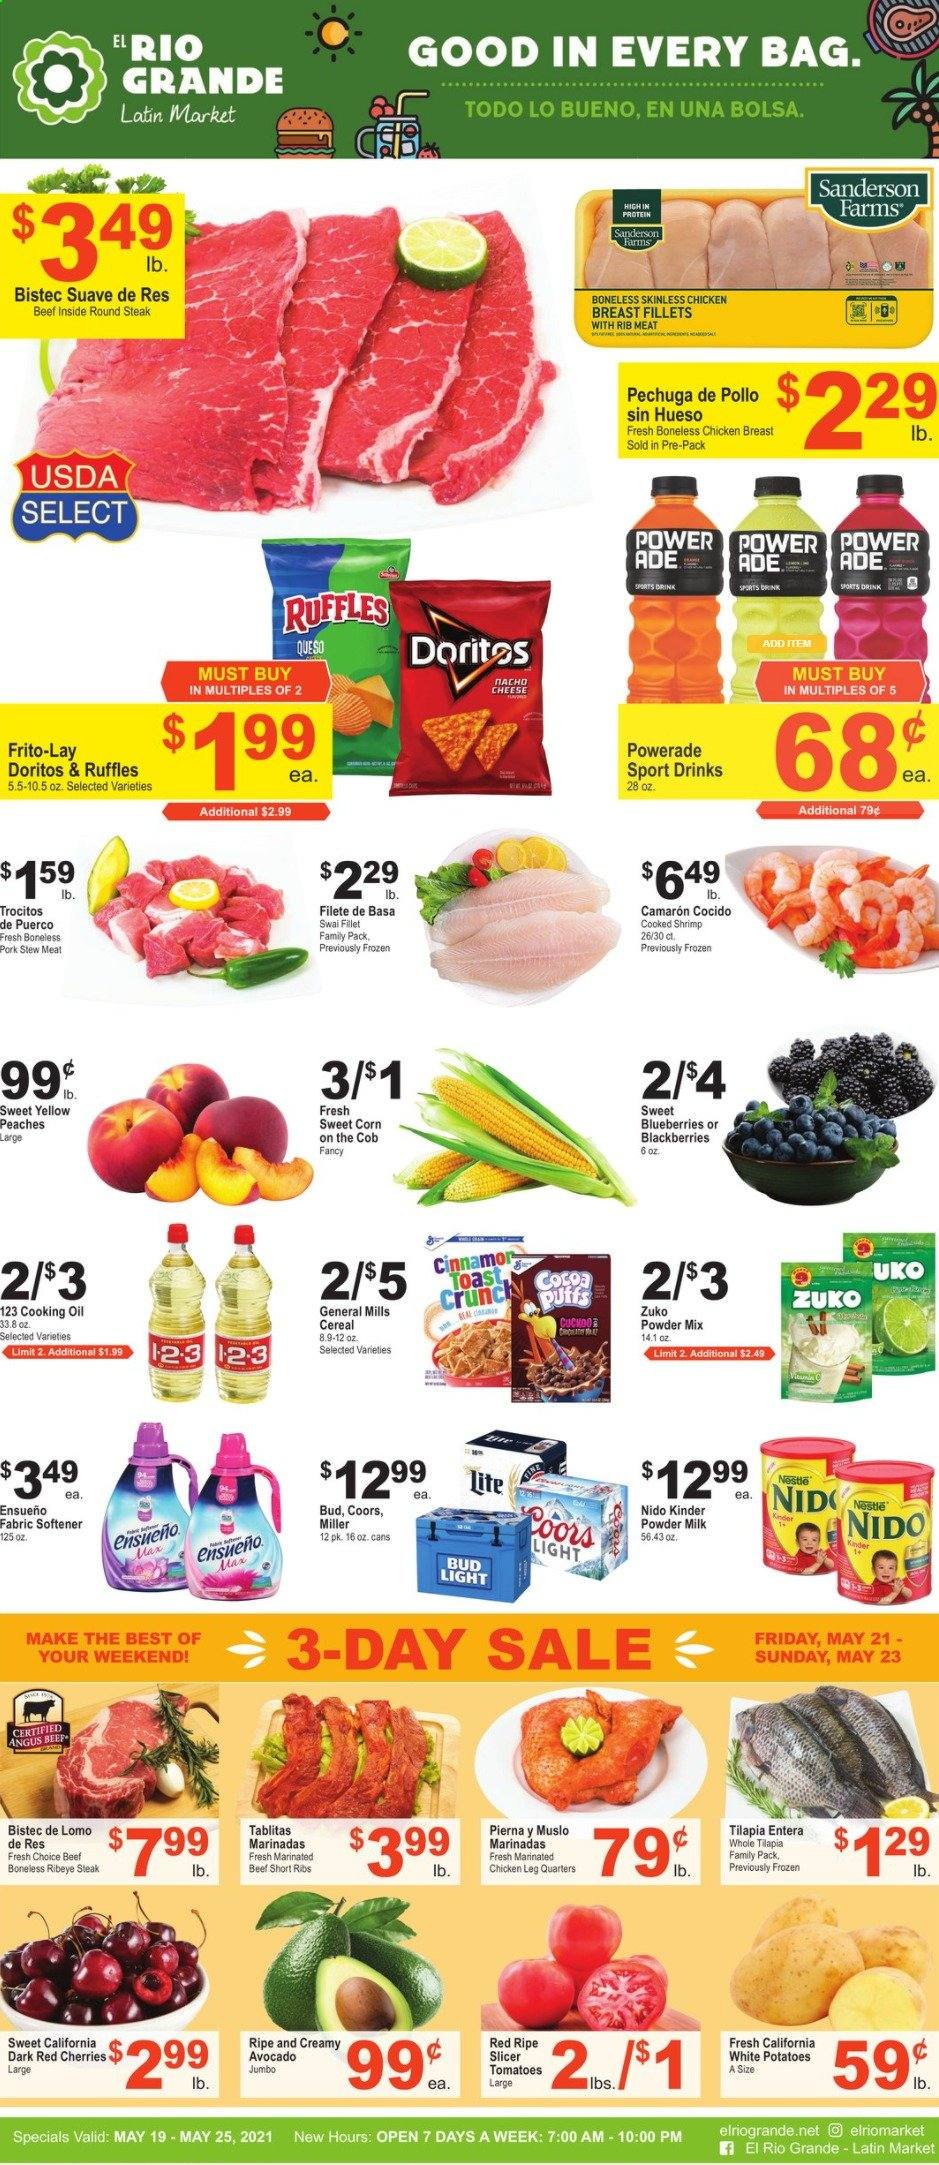 thumbnail - El Rio Grande Flyer - 05/19/2021 - 05/25/2021 - Sales products - Coors, stew meat, puffs, corn, tomatoes, potatoes, sweet corn, avocado, blackberries, blueberries, cherries, tilapia, shrimps, swai fillet, cheese, milk, Nestlé, Doritos, Frito-Lay, Ruffles, cereals, oil, Powerade, beer, Bud Light, Miller, chicken breasts, chicken legs, marinated chicken, beef meat, beef ribs, beef steak, steak, round steak, ribeye steak, marinated beef, peaches. Page 1.